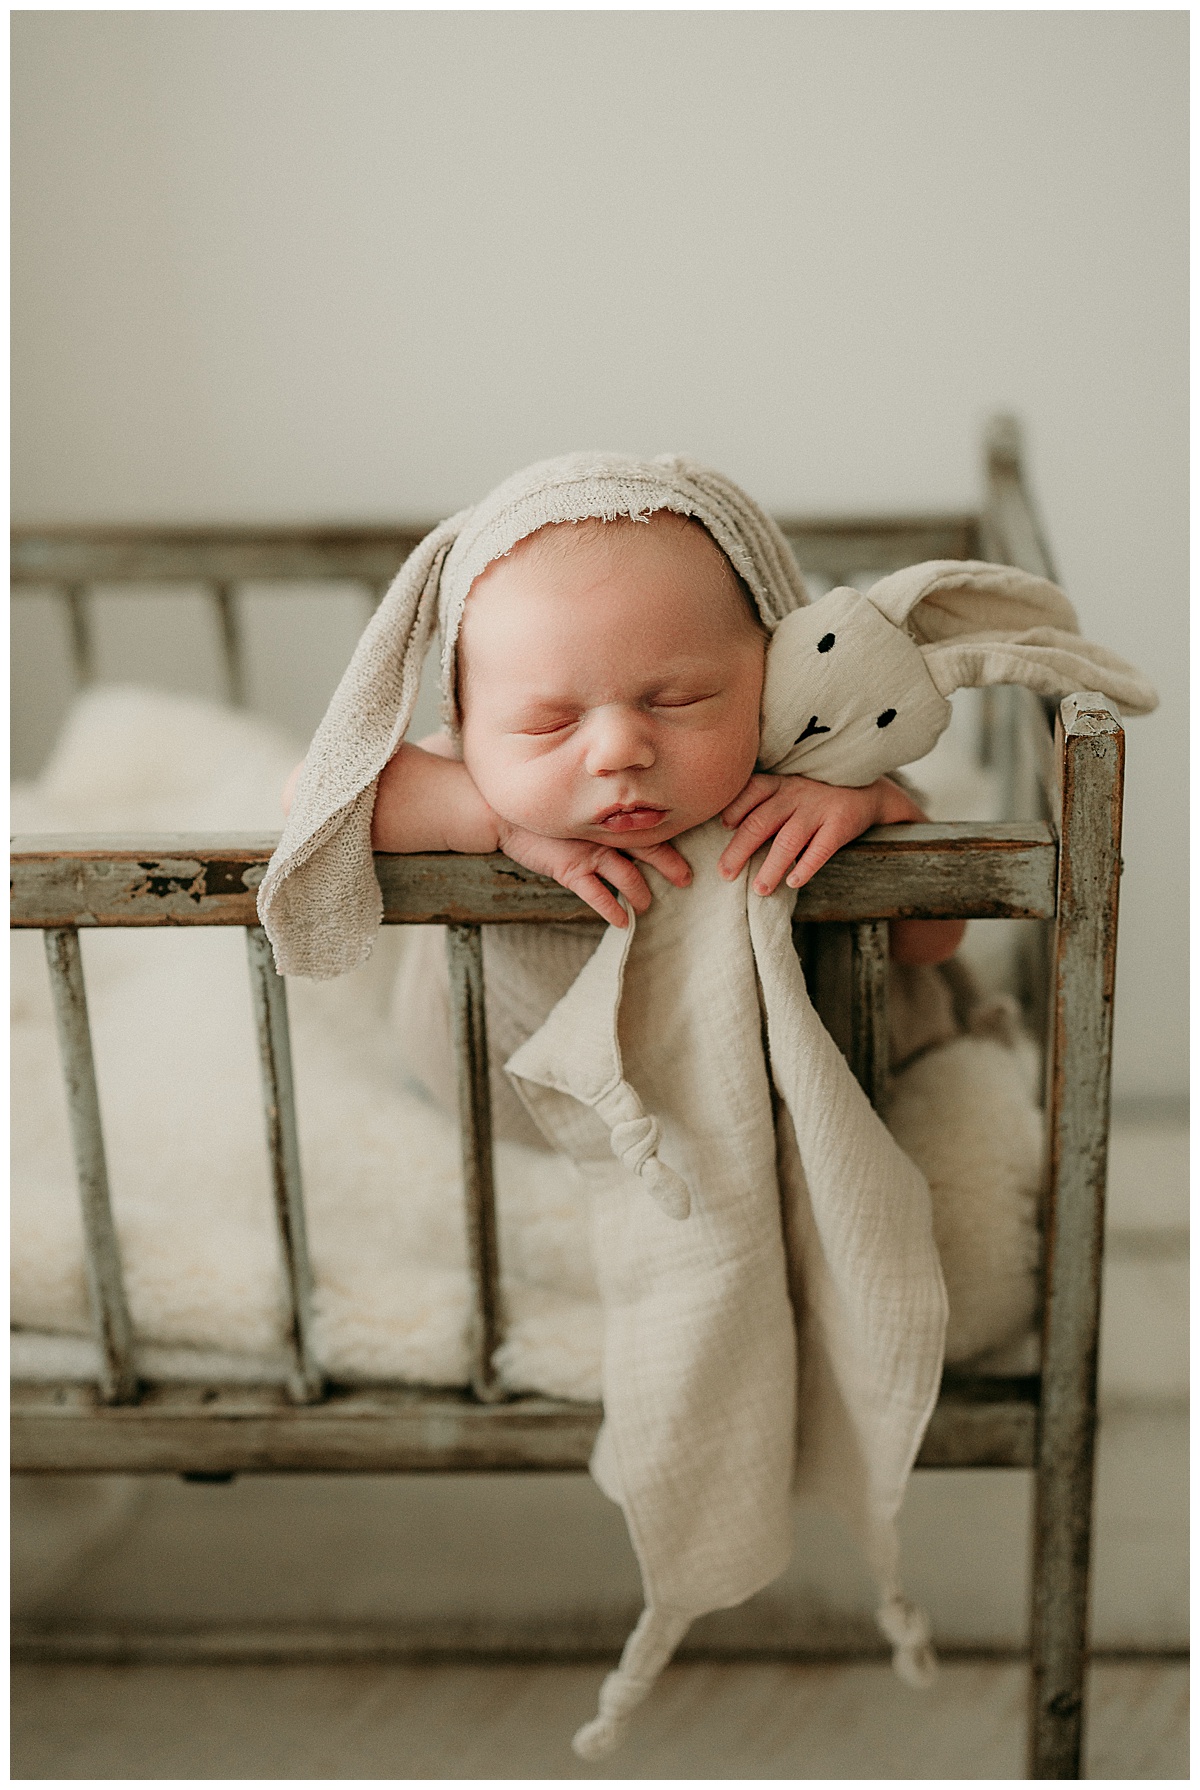 Baby rests head on wooden bassinet for Intimate Studio Newborn Session